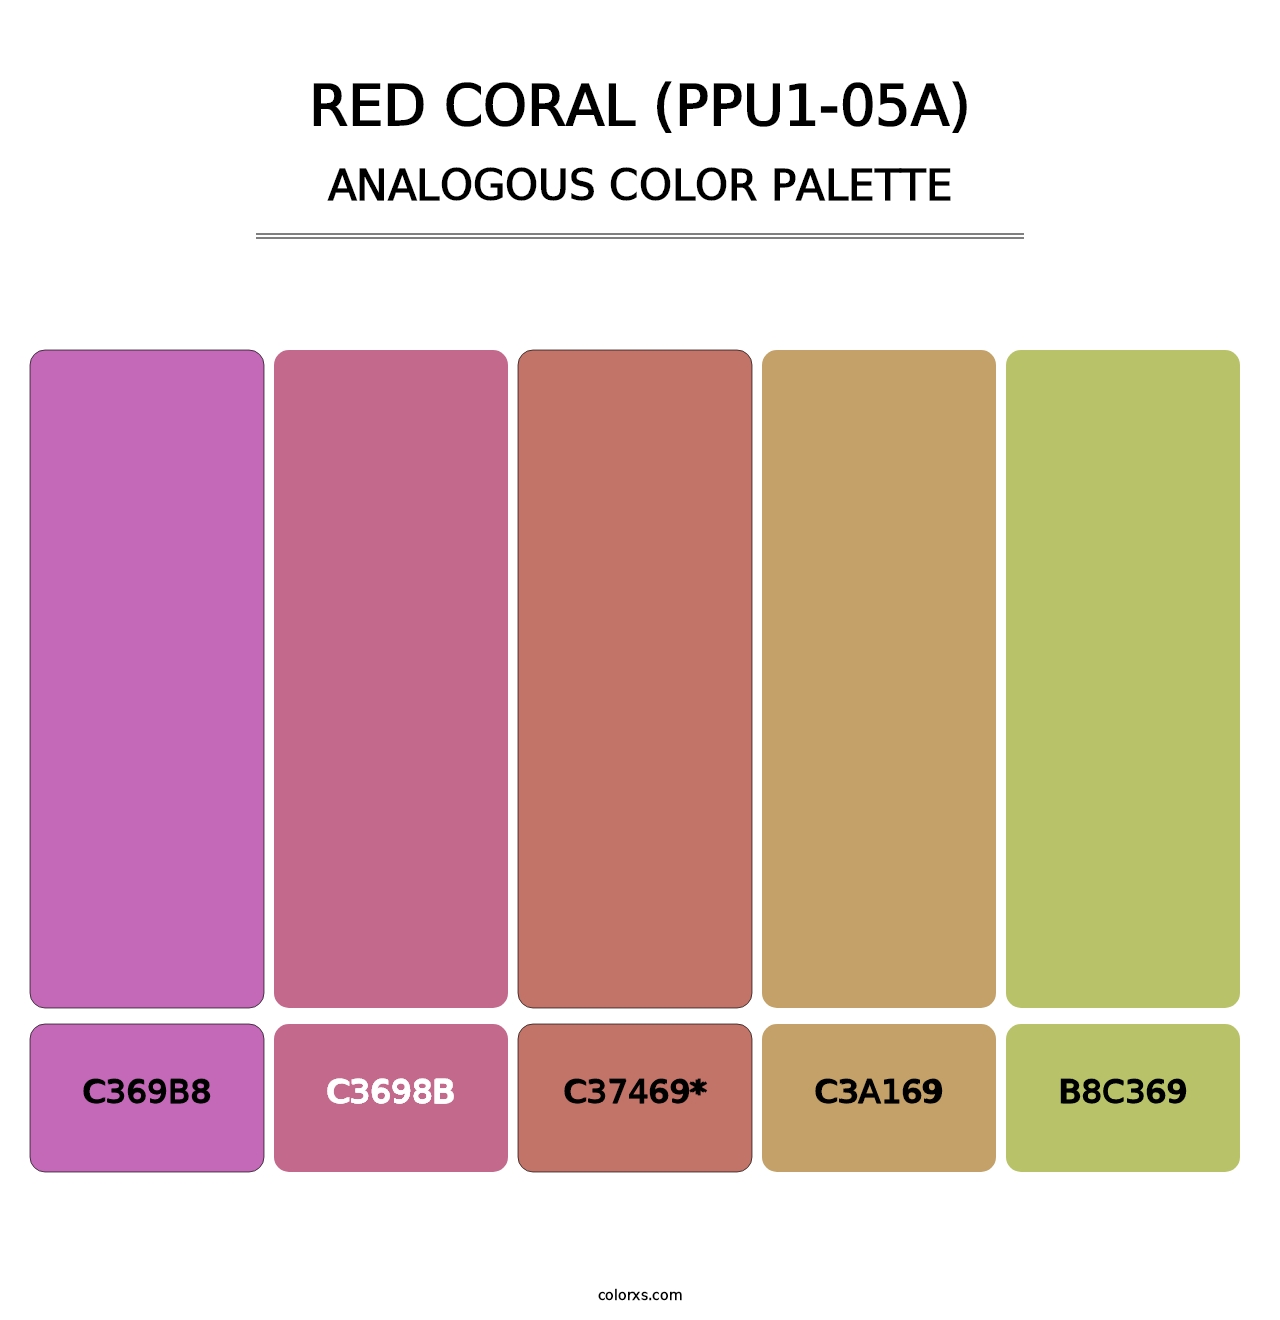 Red Coral (PPU1-05A) - Analogous Color Palette